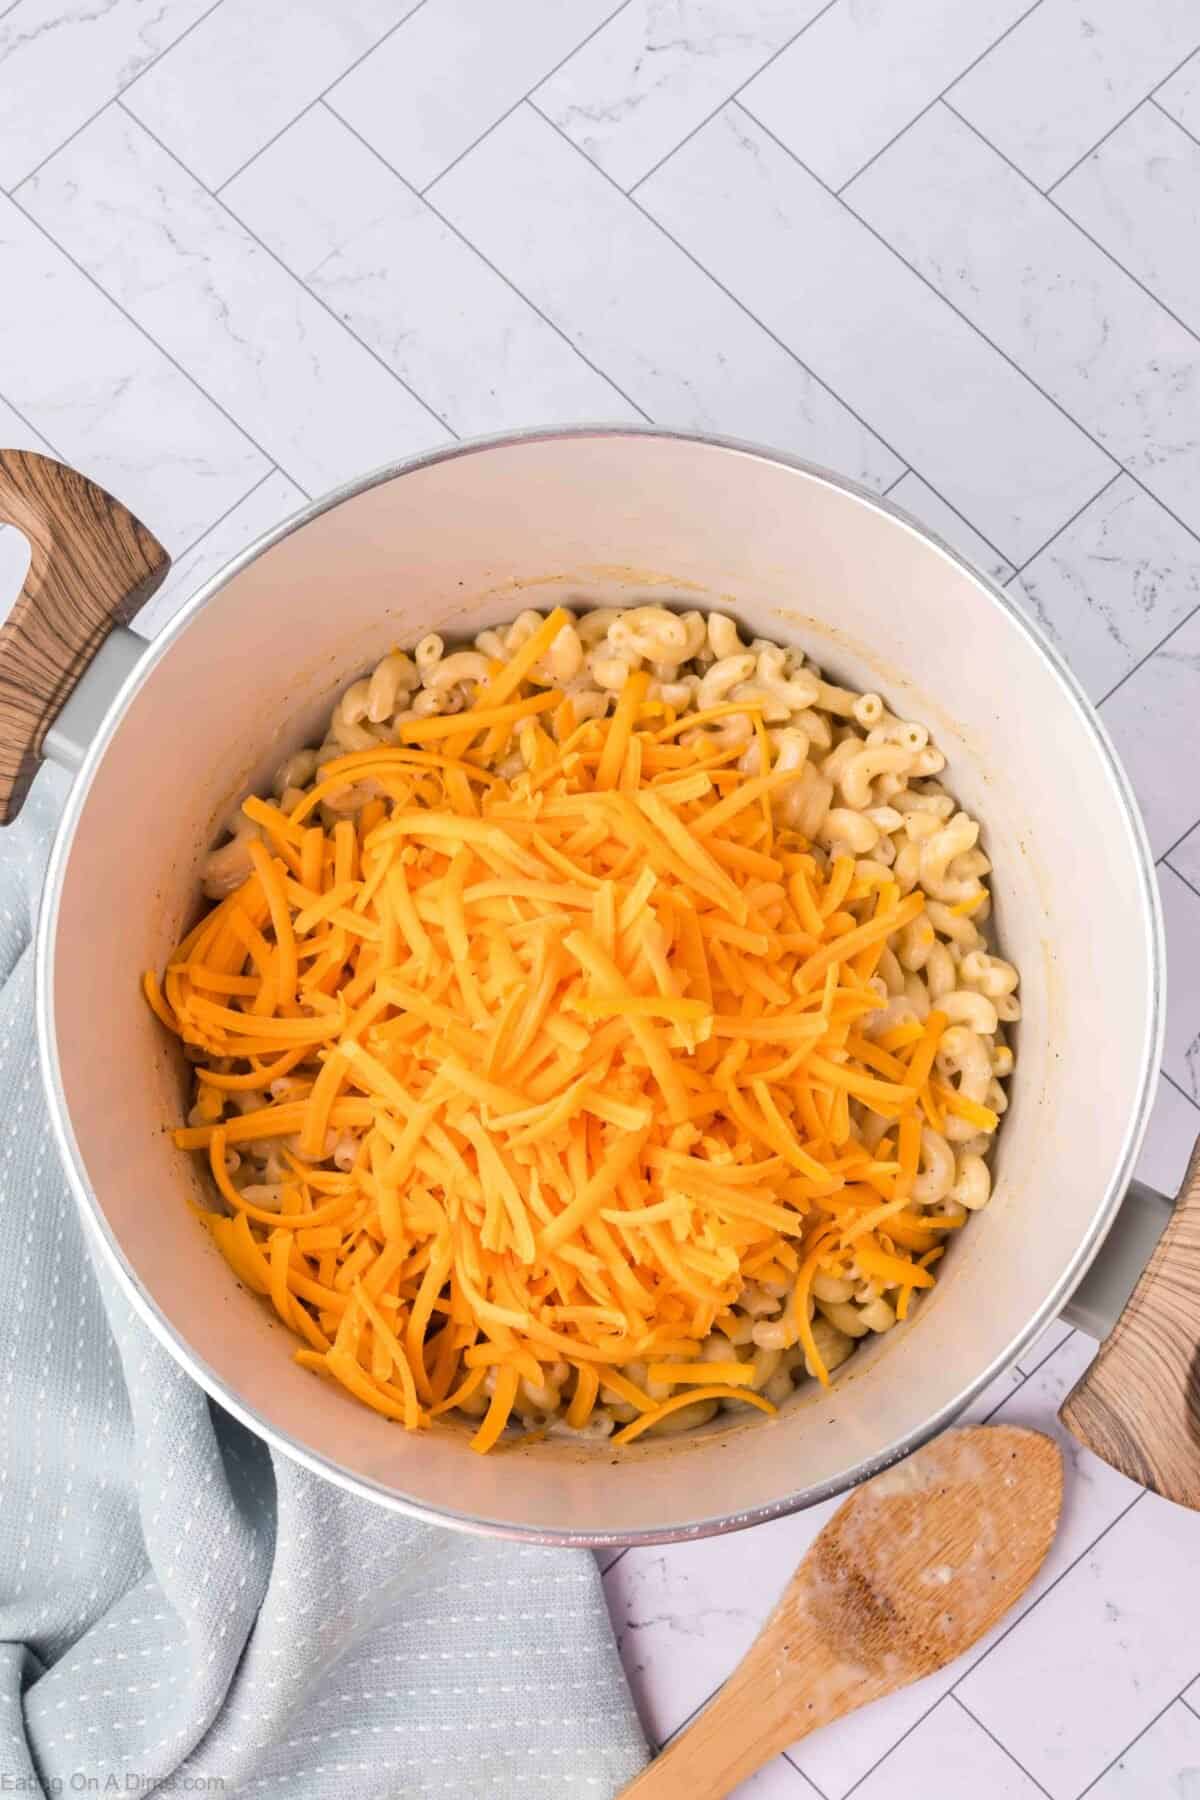 A large pot filled with cooked macaroni noodles topped with a generous amount of shredded cheddar cheese. The pot, part of an easy homemade macaroni and cheese recipe, is placed on a light blue kitchen towel, and a wooden spoon rests beside it on the tiled kitchen surface.